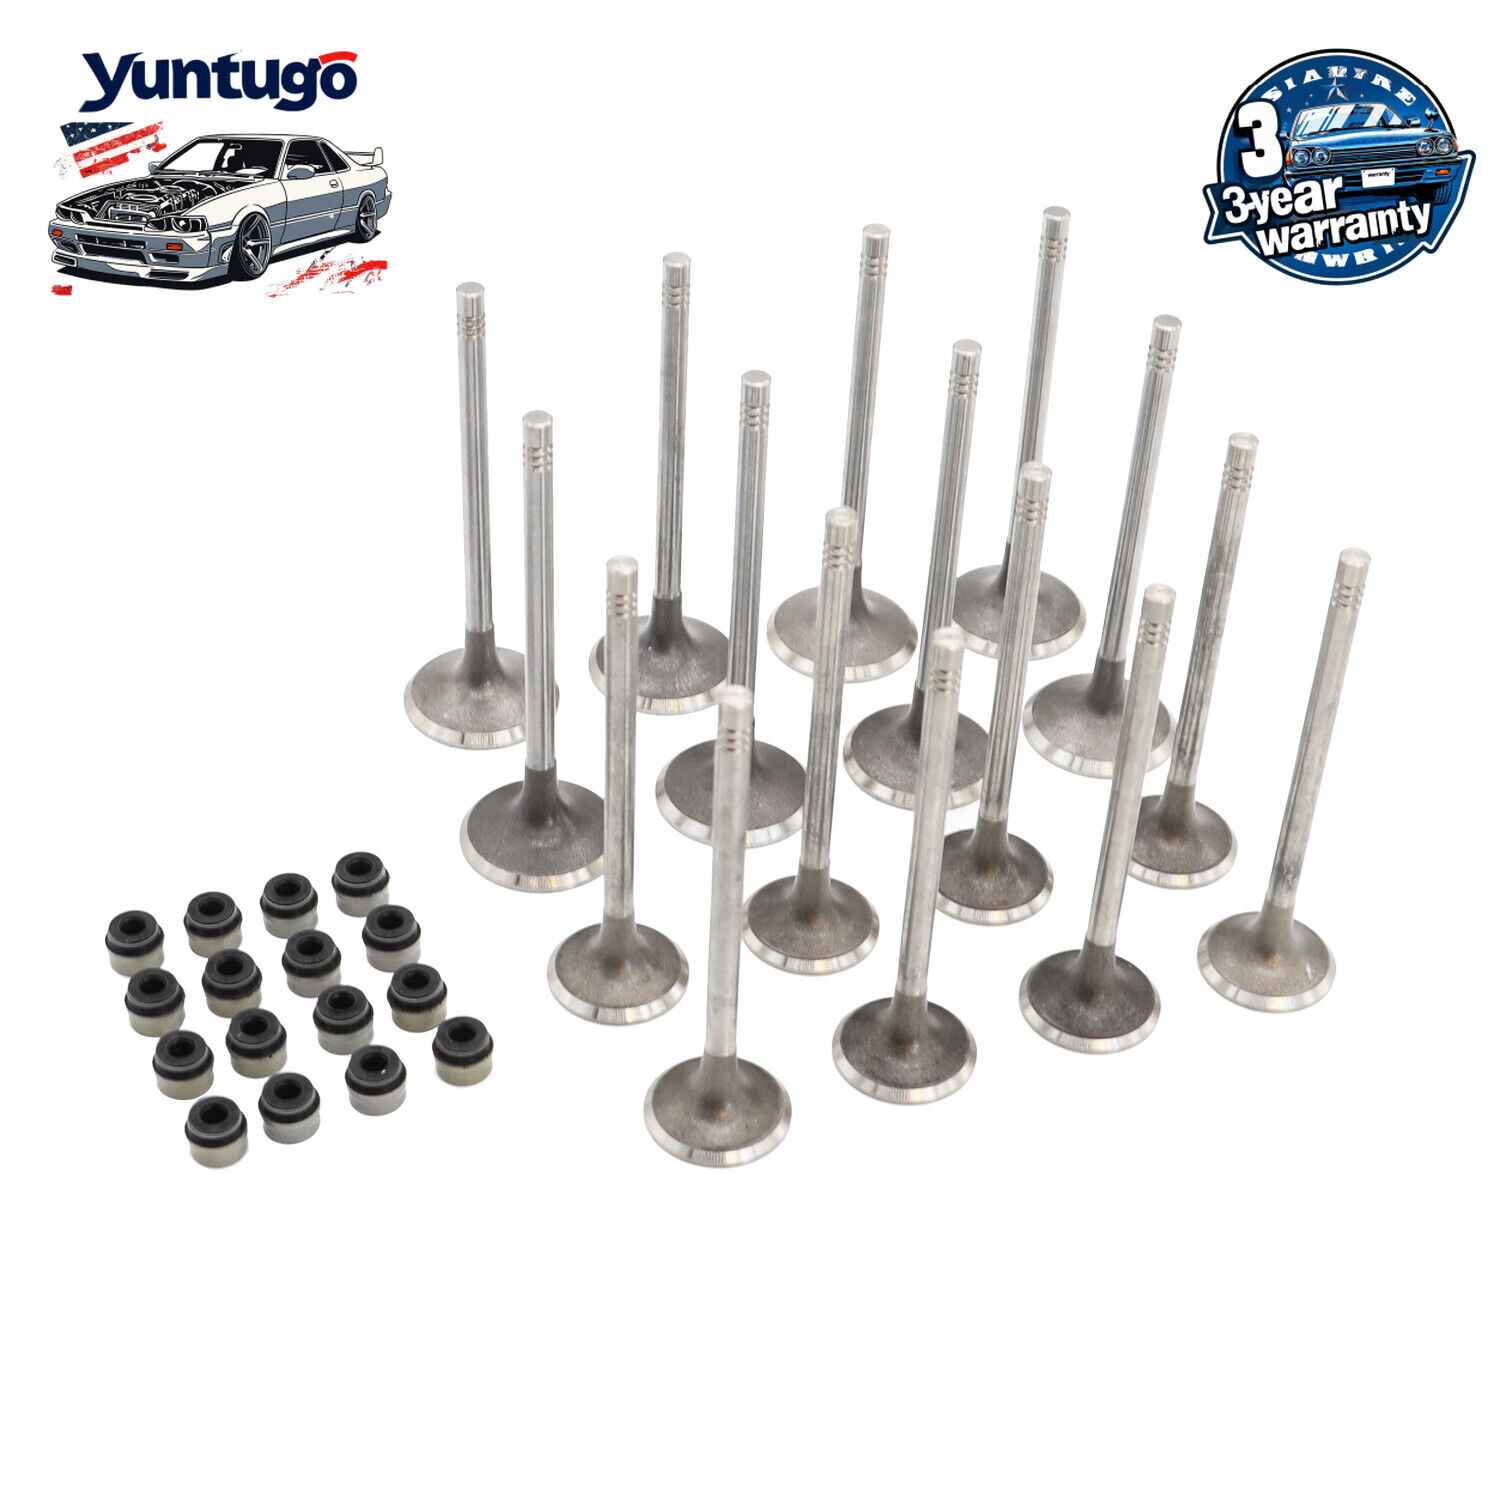 1 Set Engine Intake and Exhaust Valves Kit for Audi A3 A5 TT Q3 Q5 06D109611T